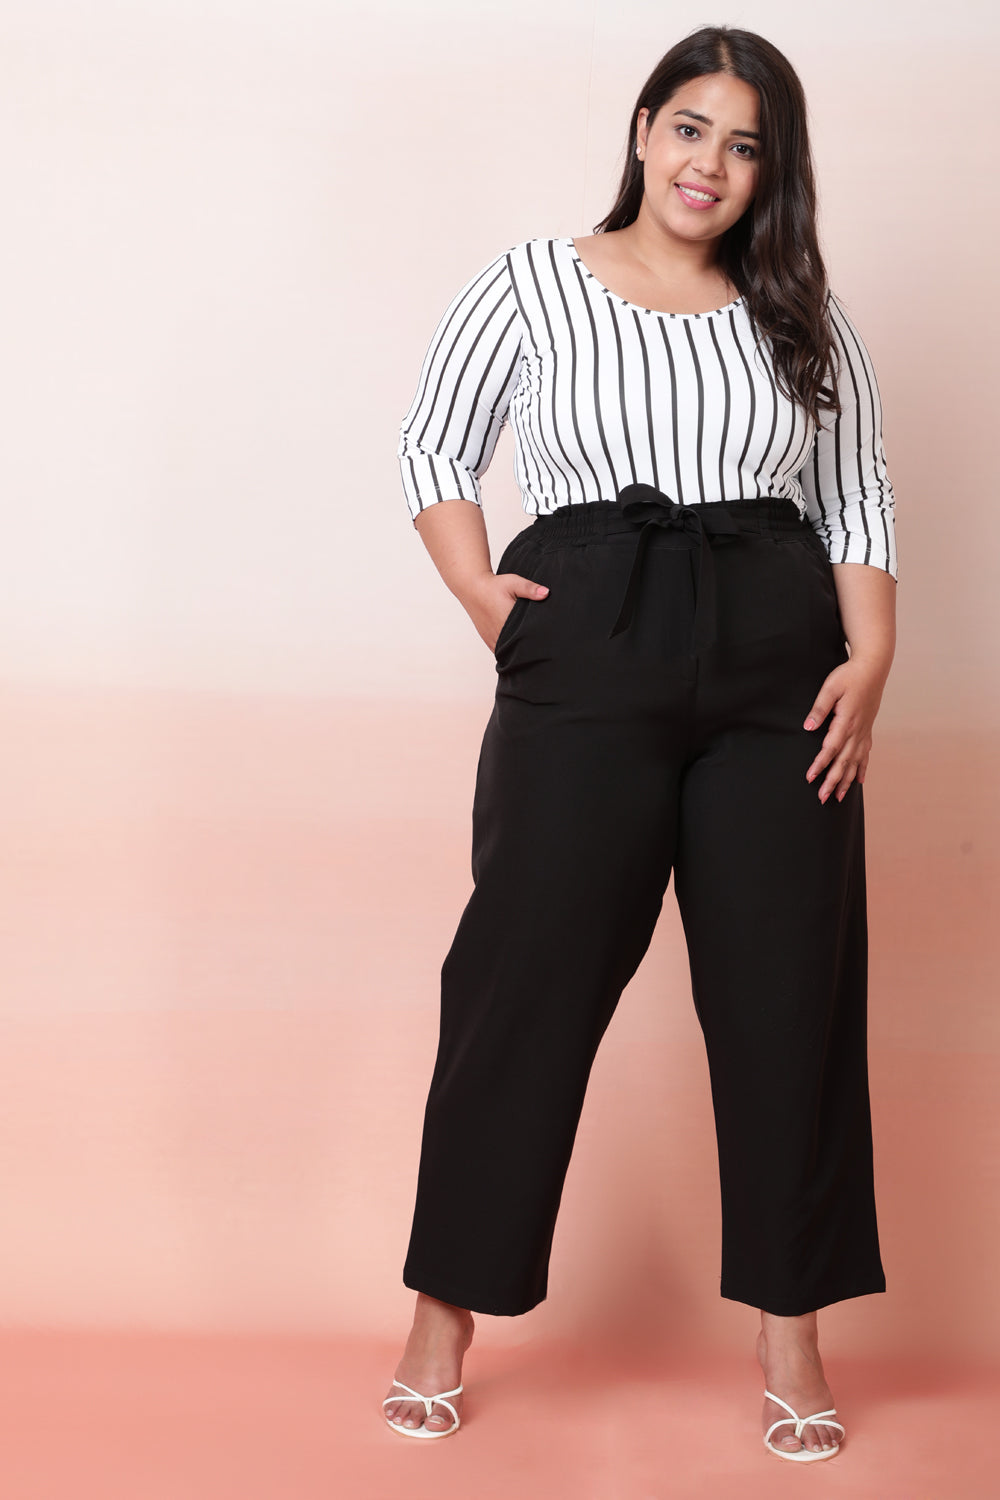 Buy KIMCURVY Plus Size Cropped Paper Bag Pants for Women High Waist Pants  with BowKnot Pockets for Work and Casual Days Black 16 Plus at Amazonin